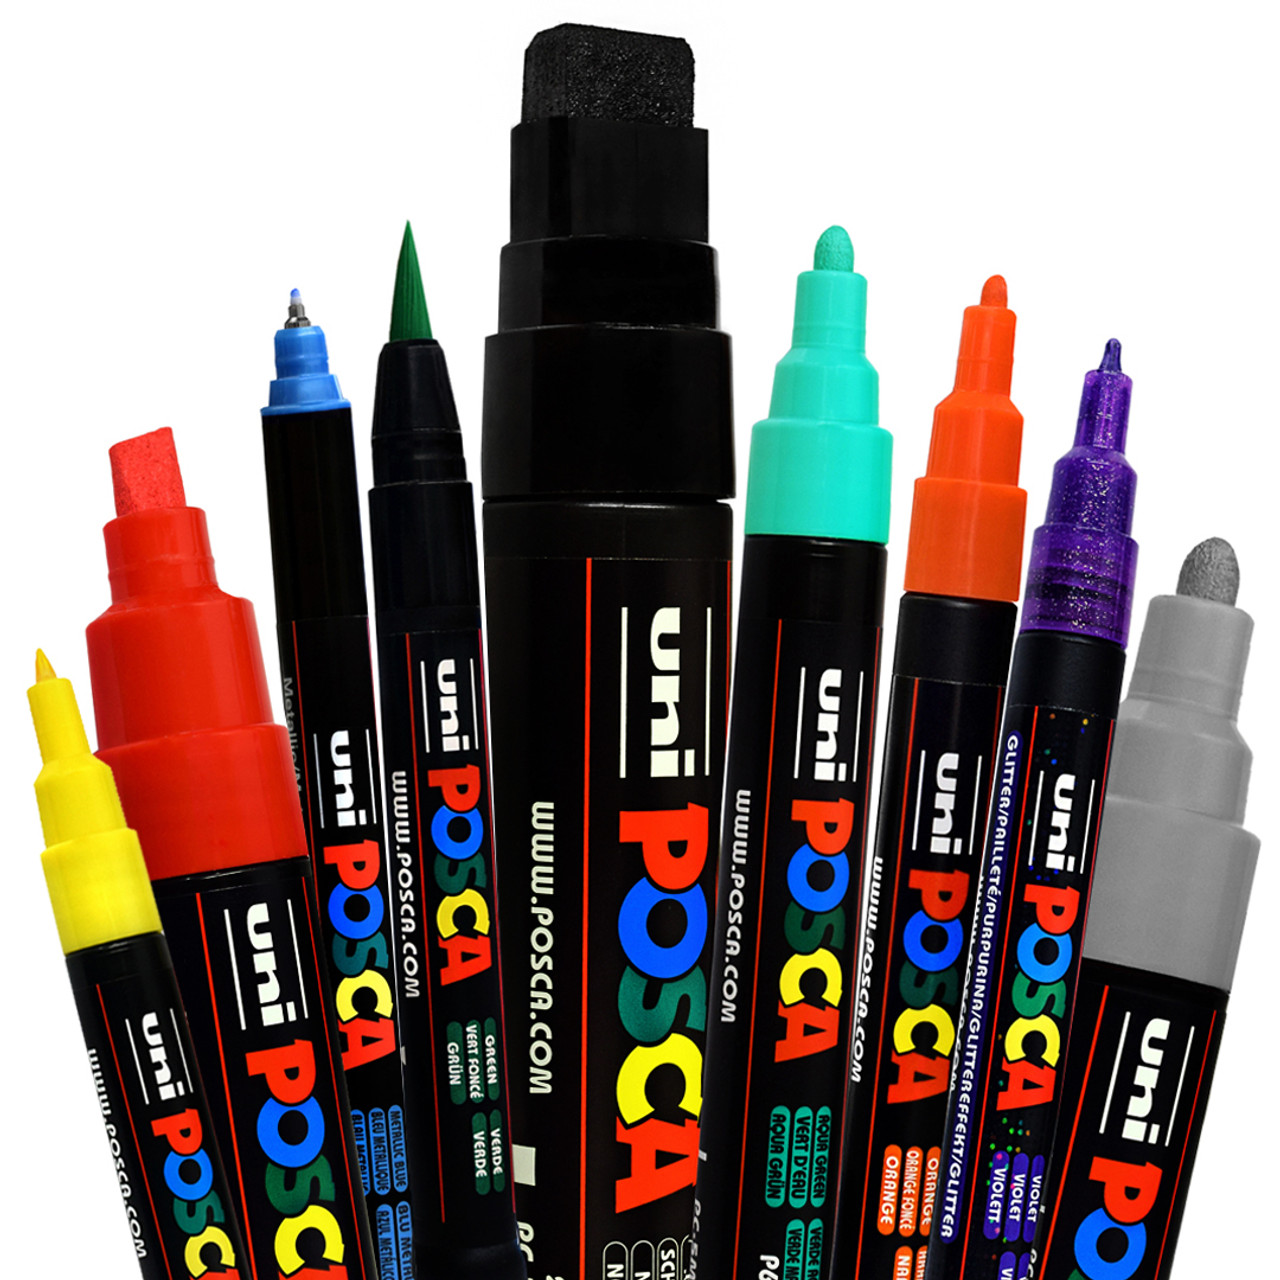 Marvy Decocolor Acrylic Paint Markers